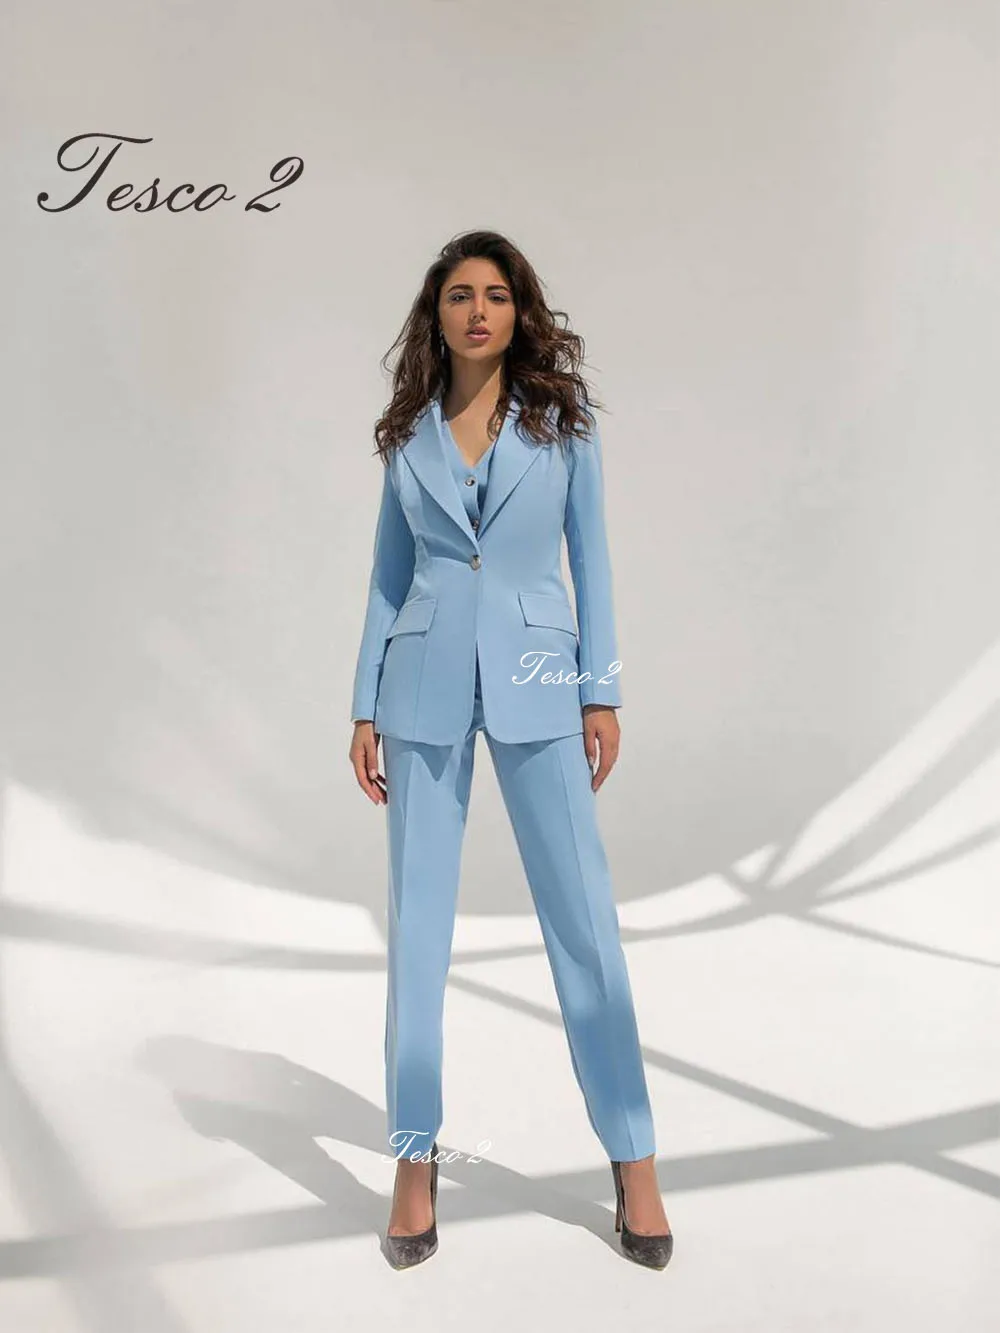 Womens New Light Blue Suits Blazer With Pants Two Piece Set Office Elegant  Work | eBay